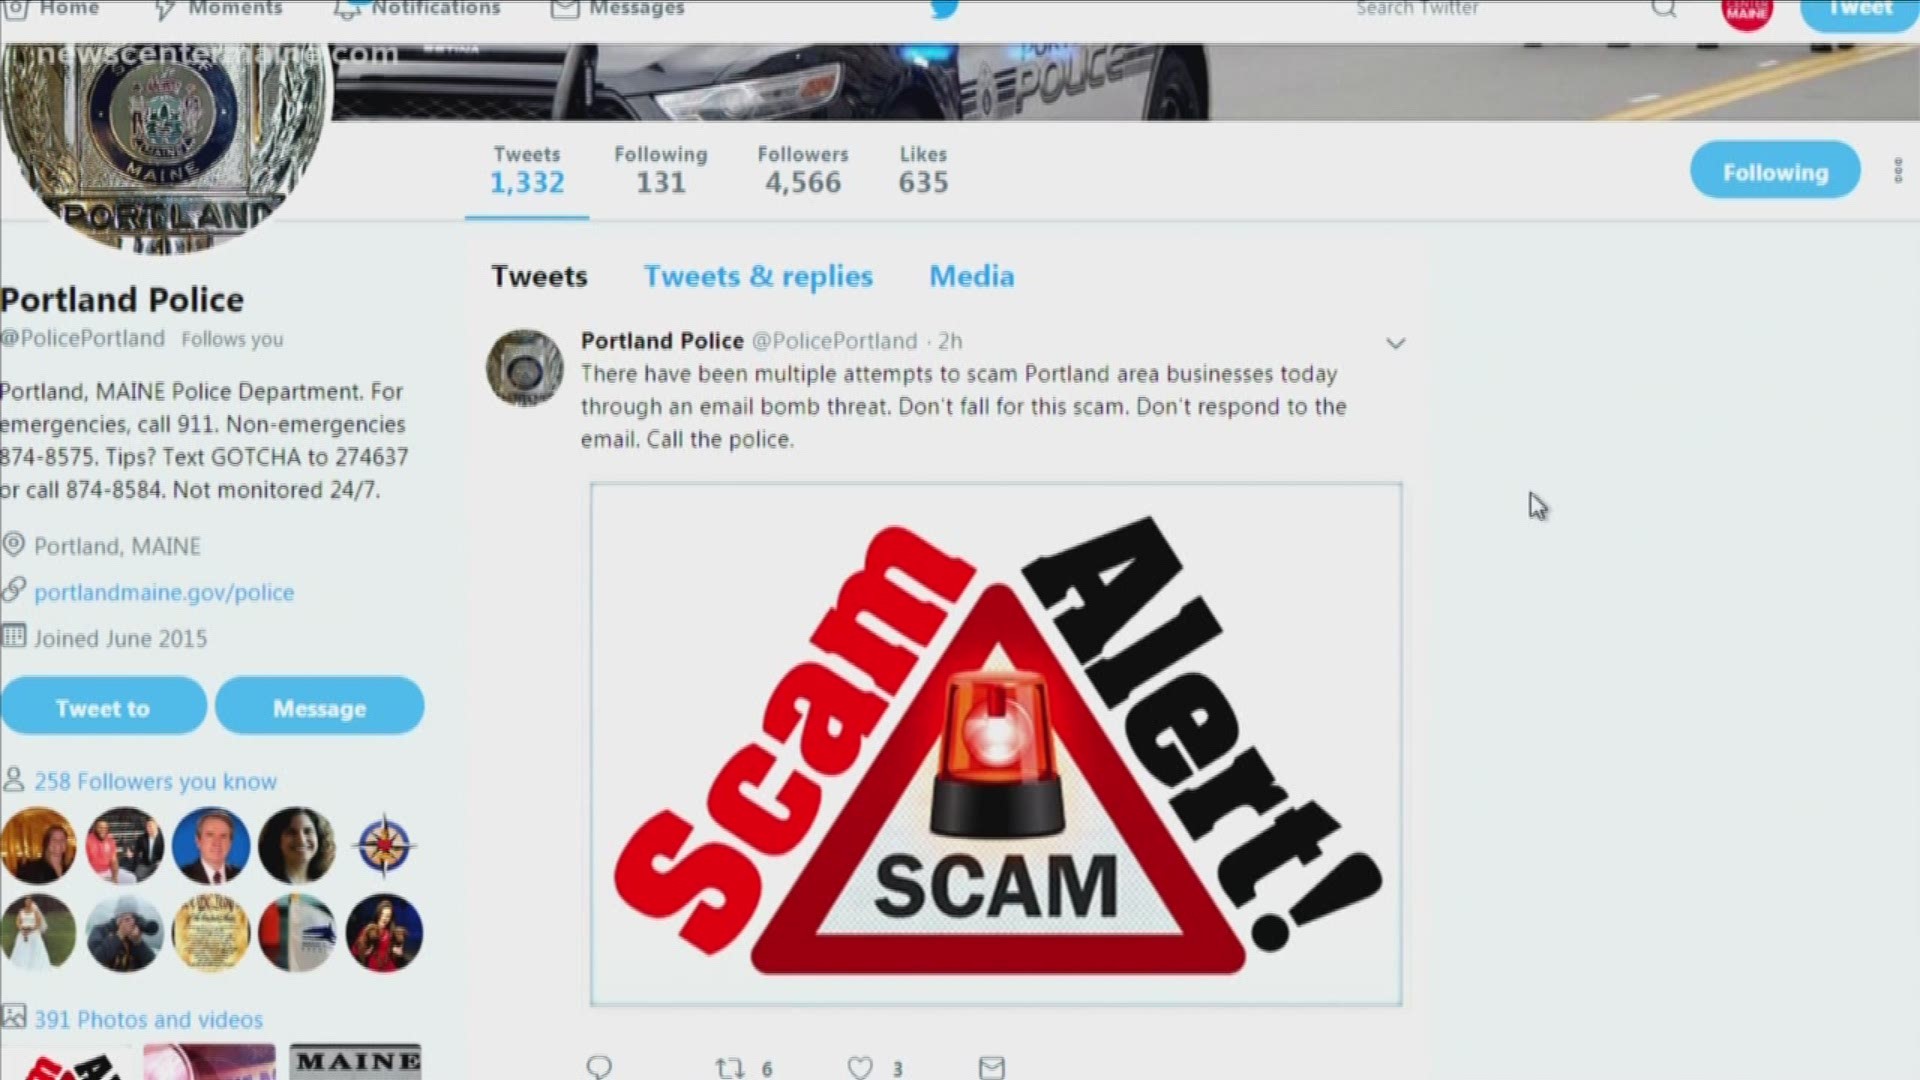 Portland police issues scam alert after reports of email bomb threat